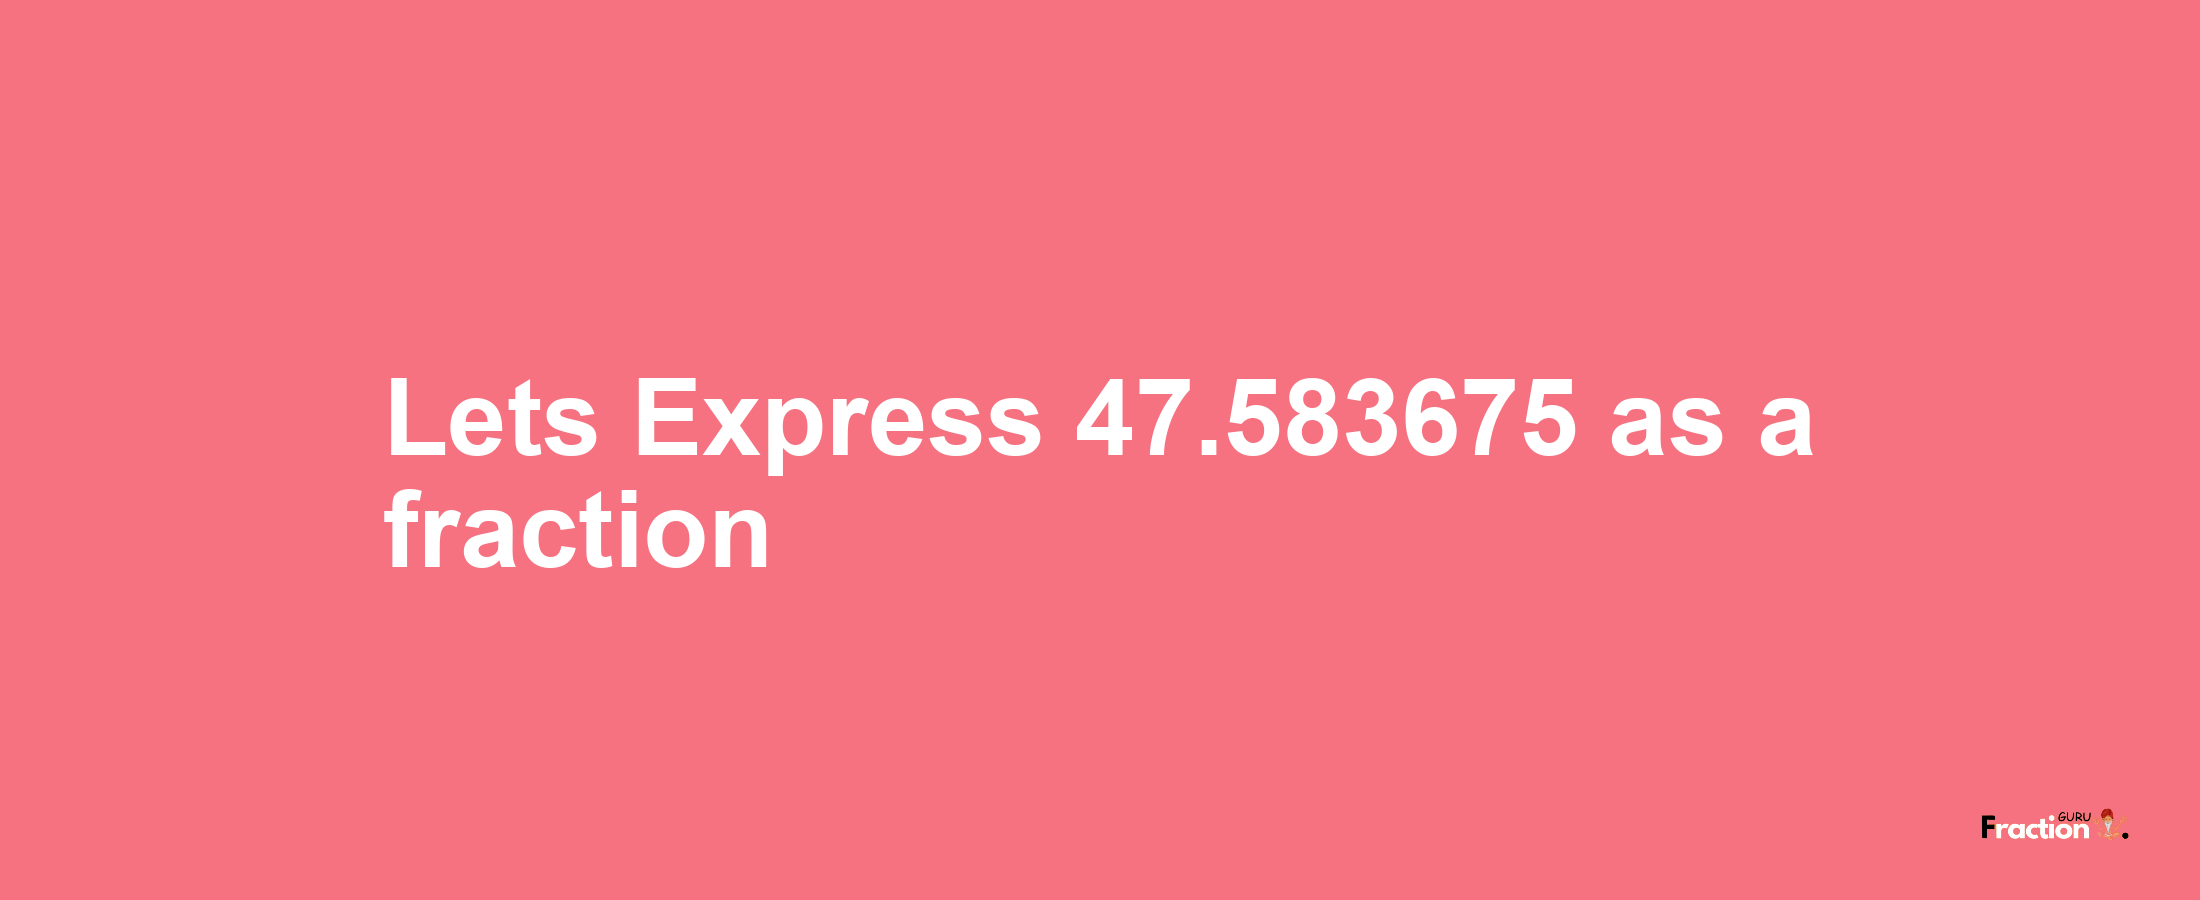 Lets Express 47.583675 as afraction